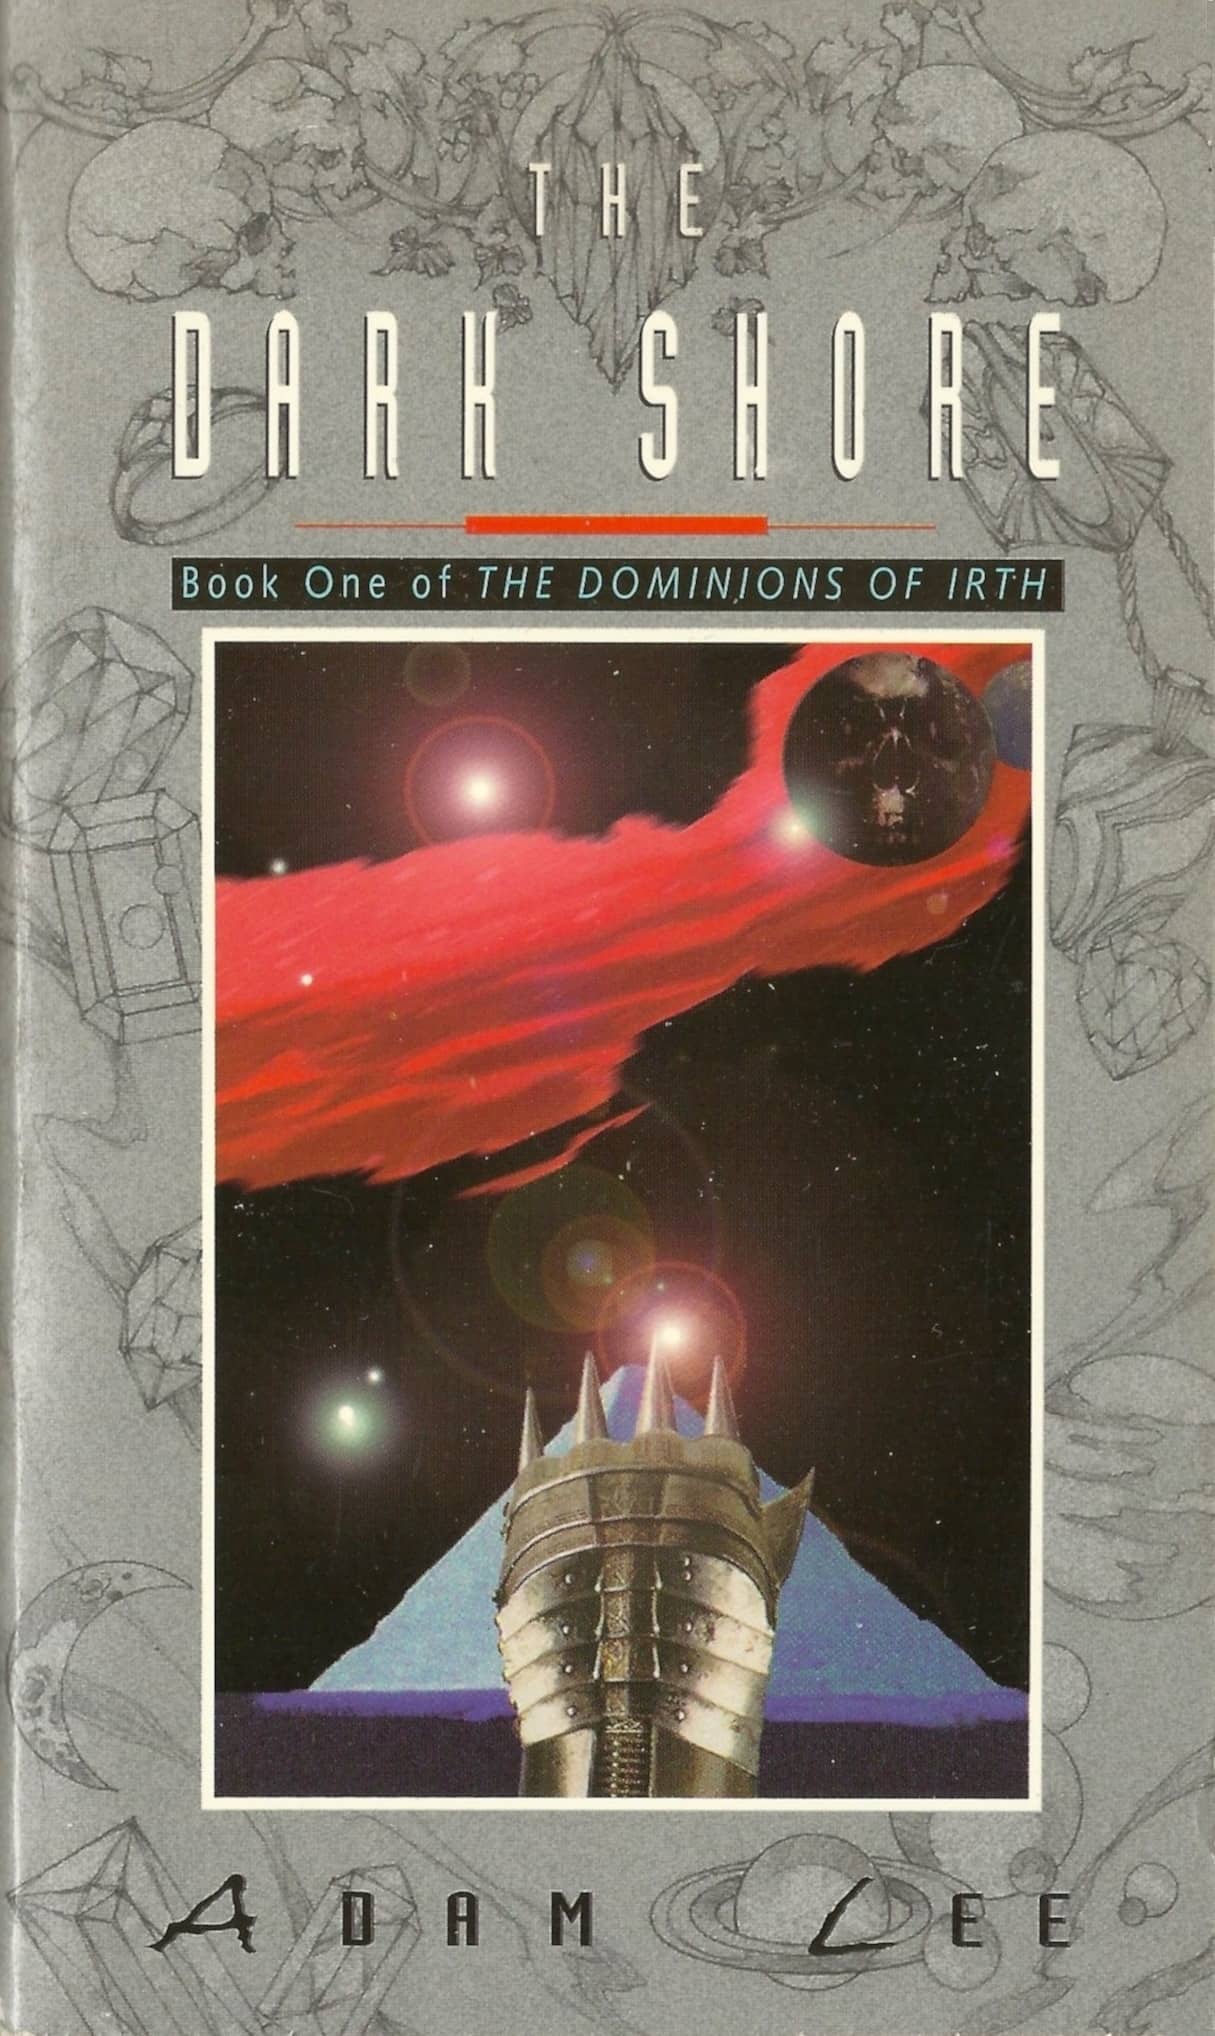 Vintage Treasures: The Dominions of Irth Trilogy by Adam Lee (A. A. Attanasio)